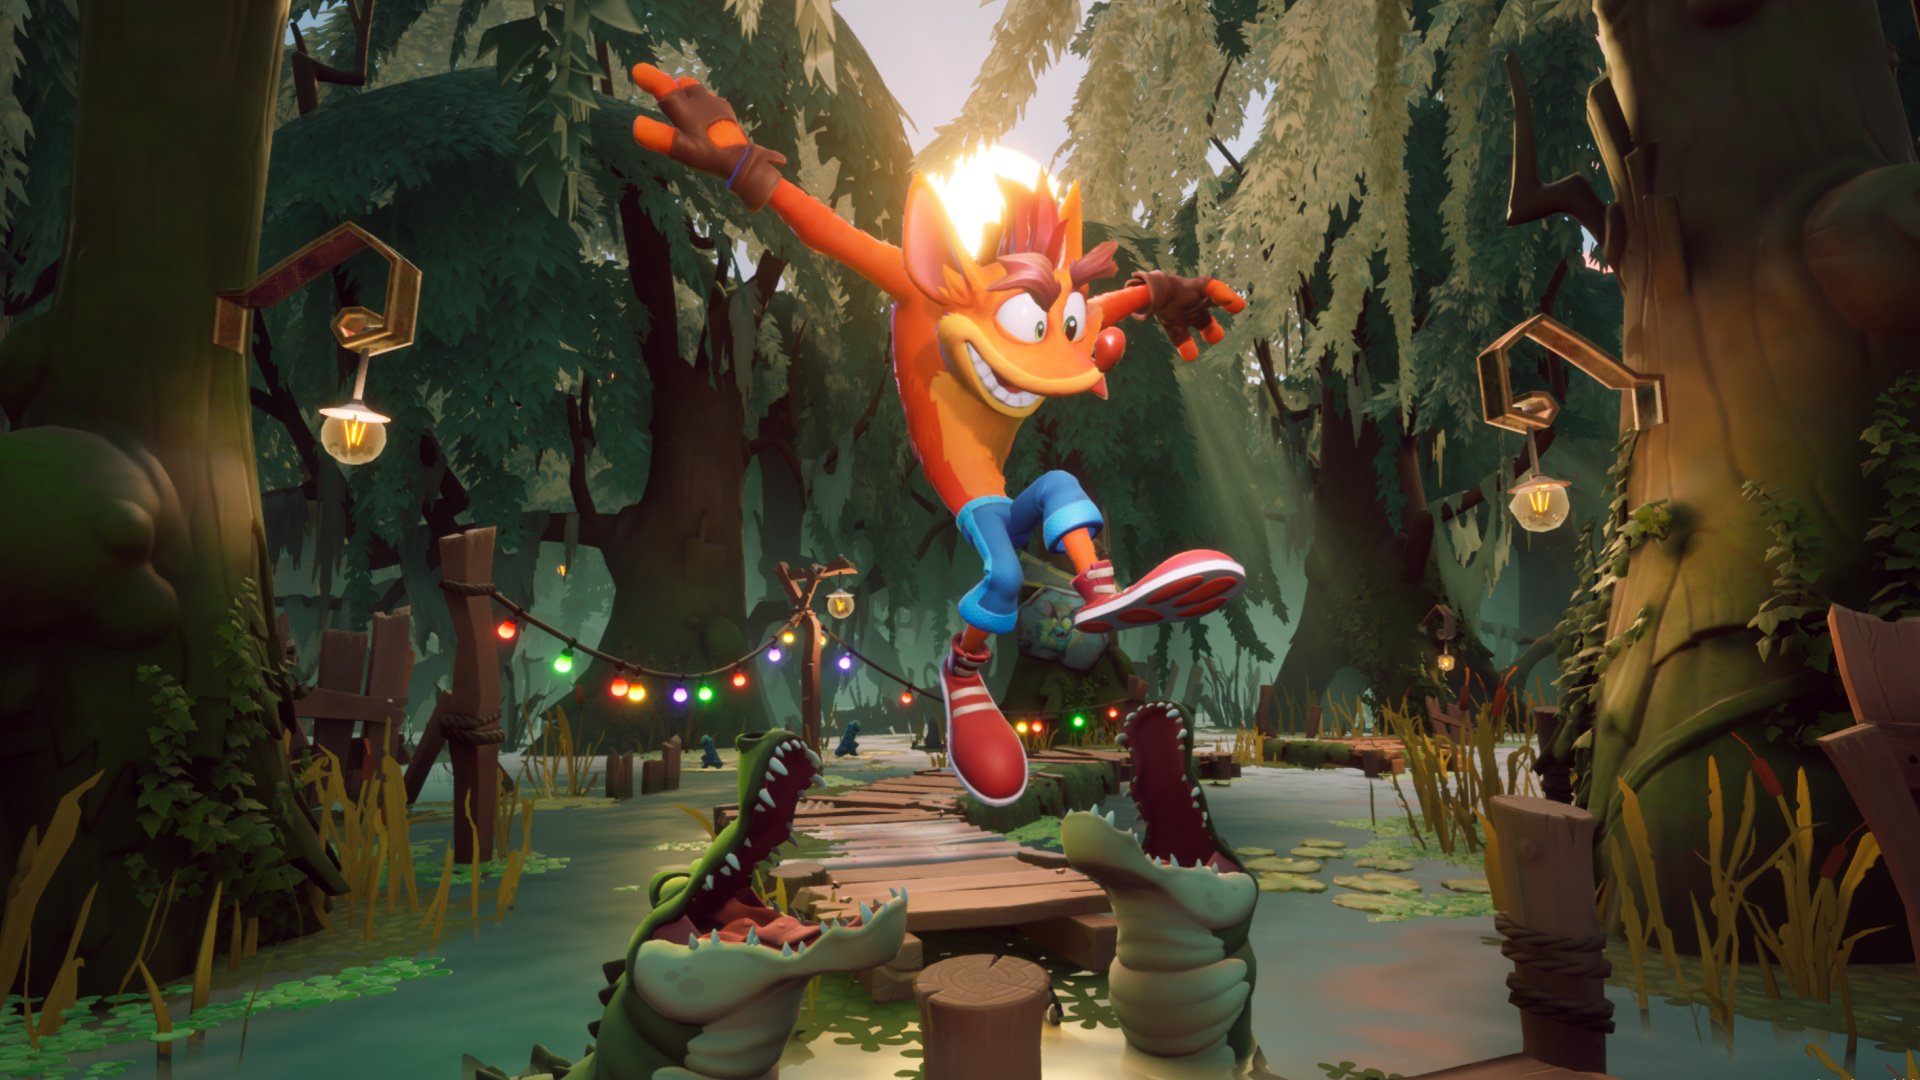 Crash Bandicoot 4: It's About Time' review: Classic platforming